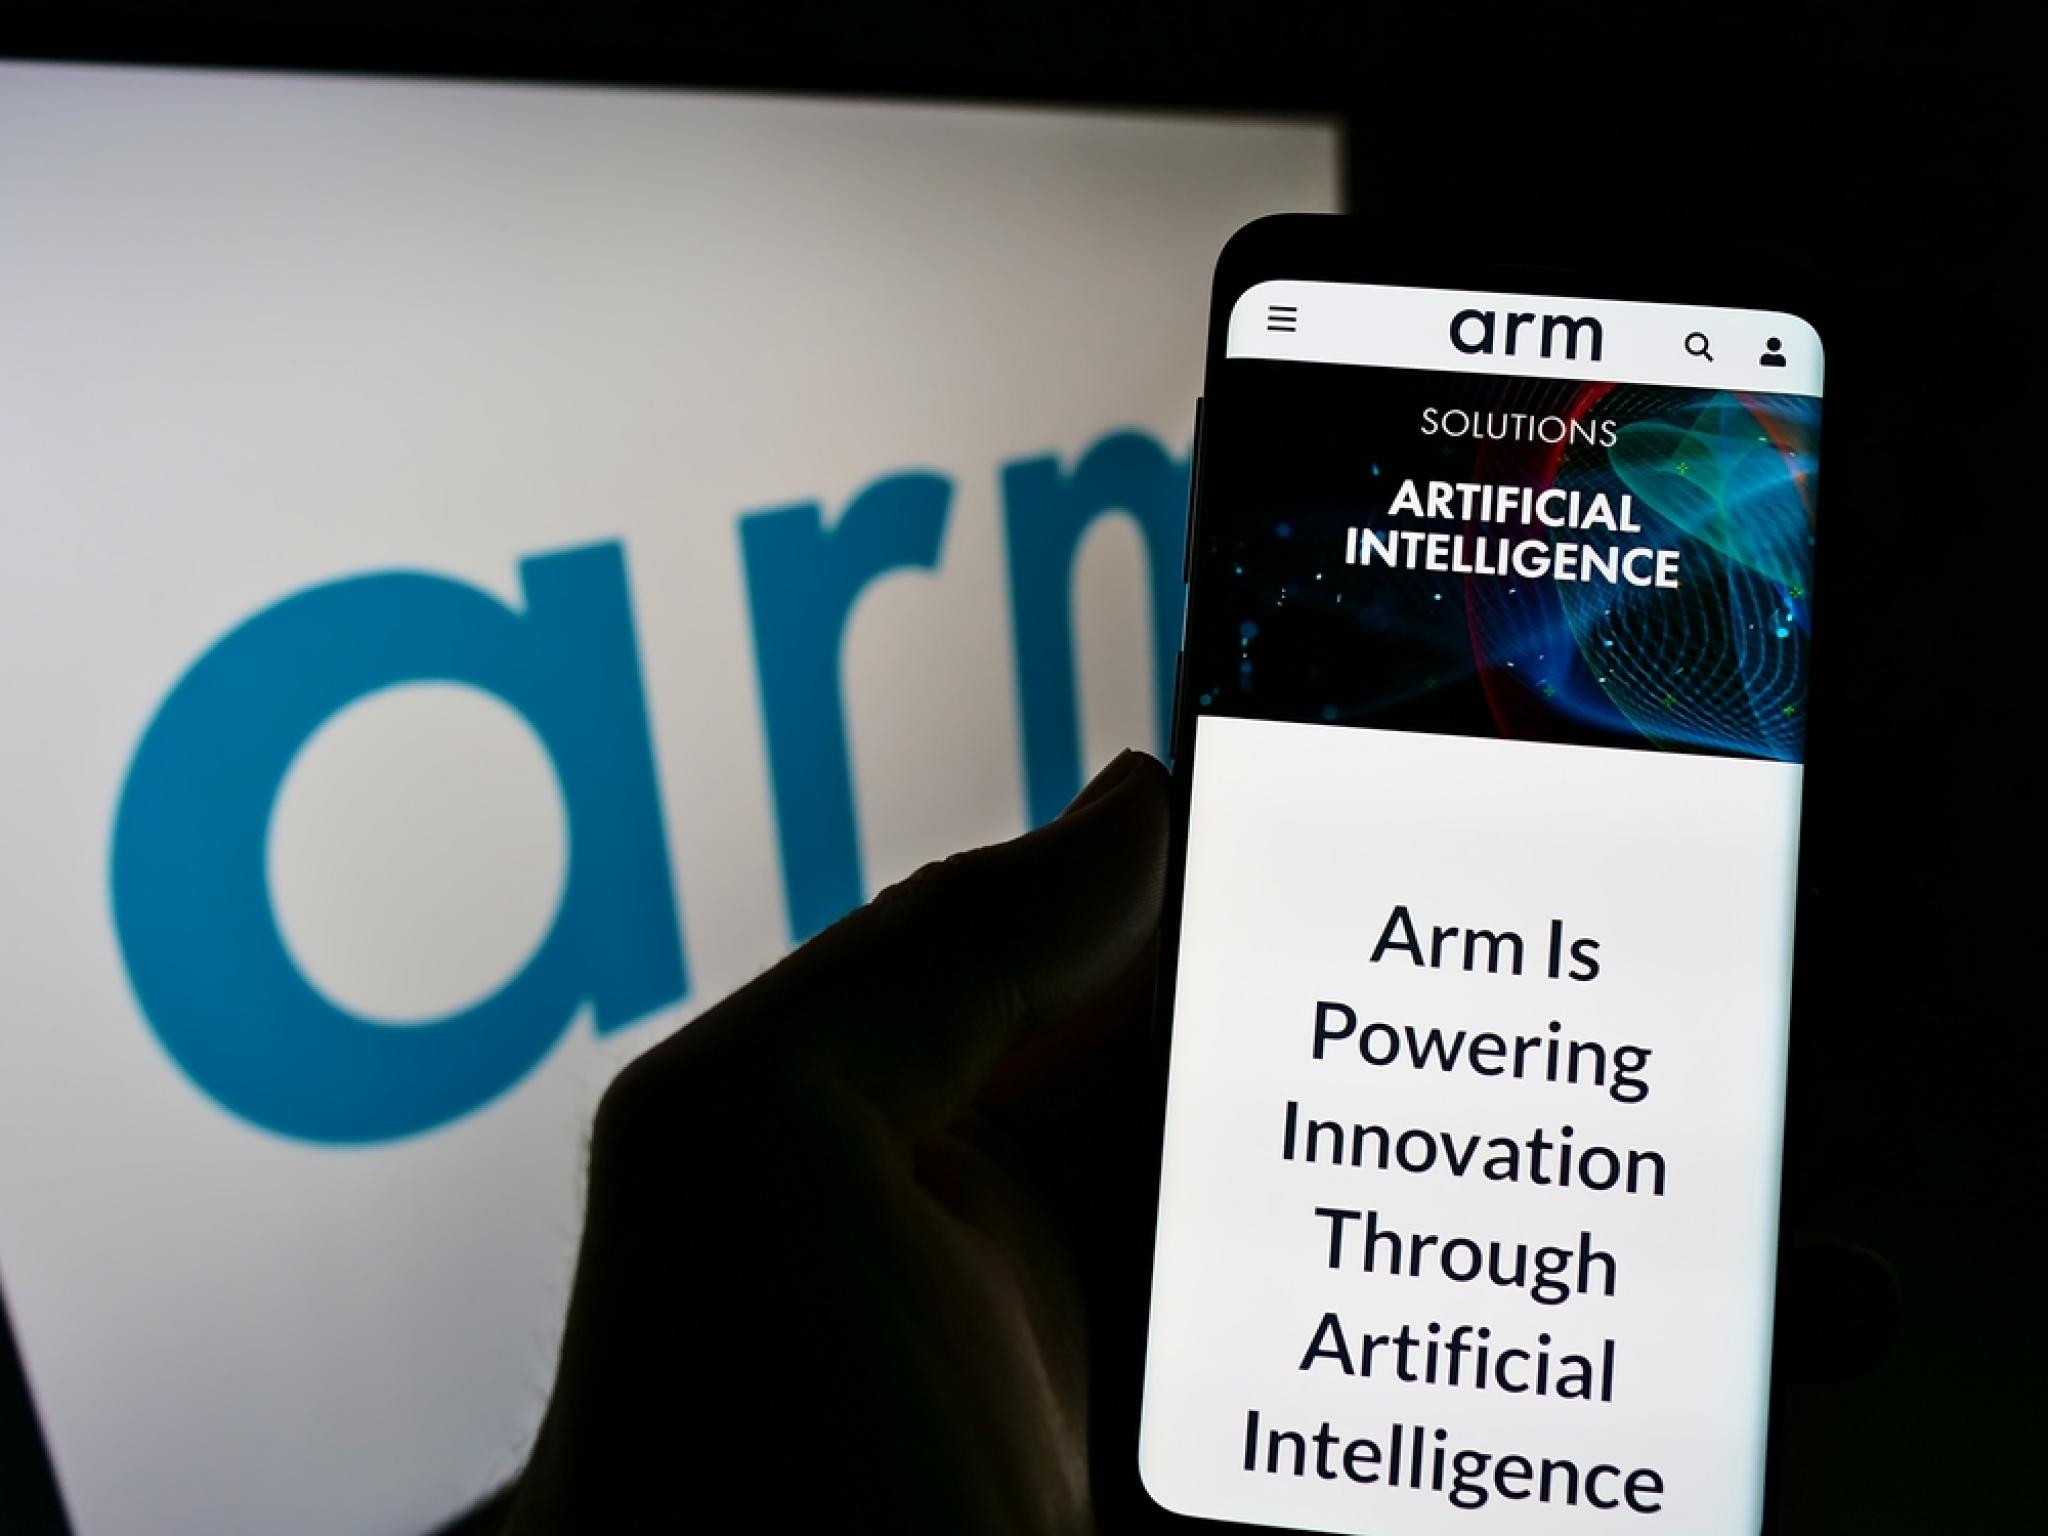  arm-holdings-poised-to-challenge-qualcomm-intel-amd-in-ai-analysts-predict-growth-in-chip-design 